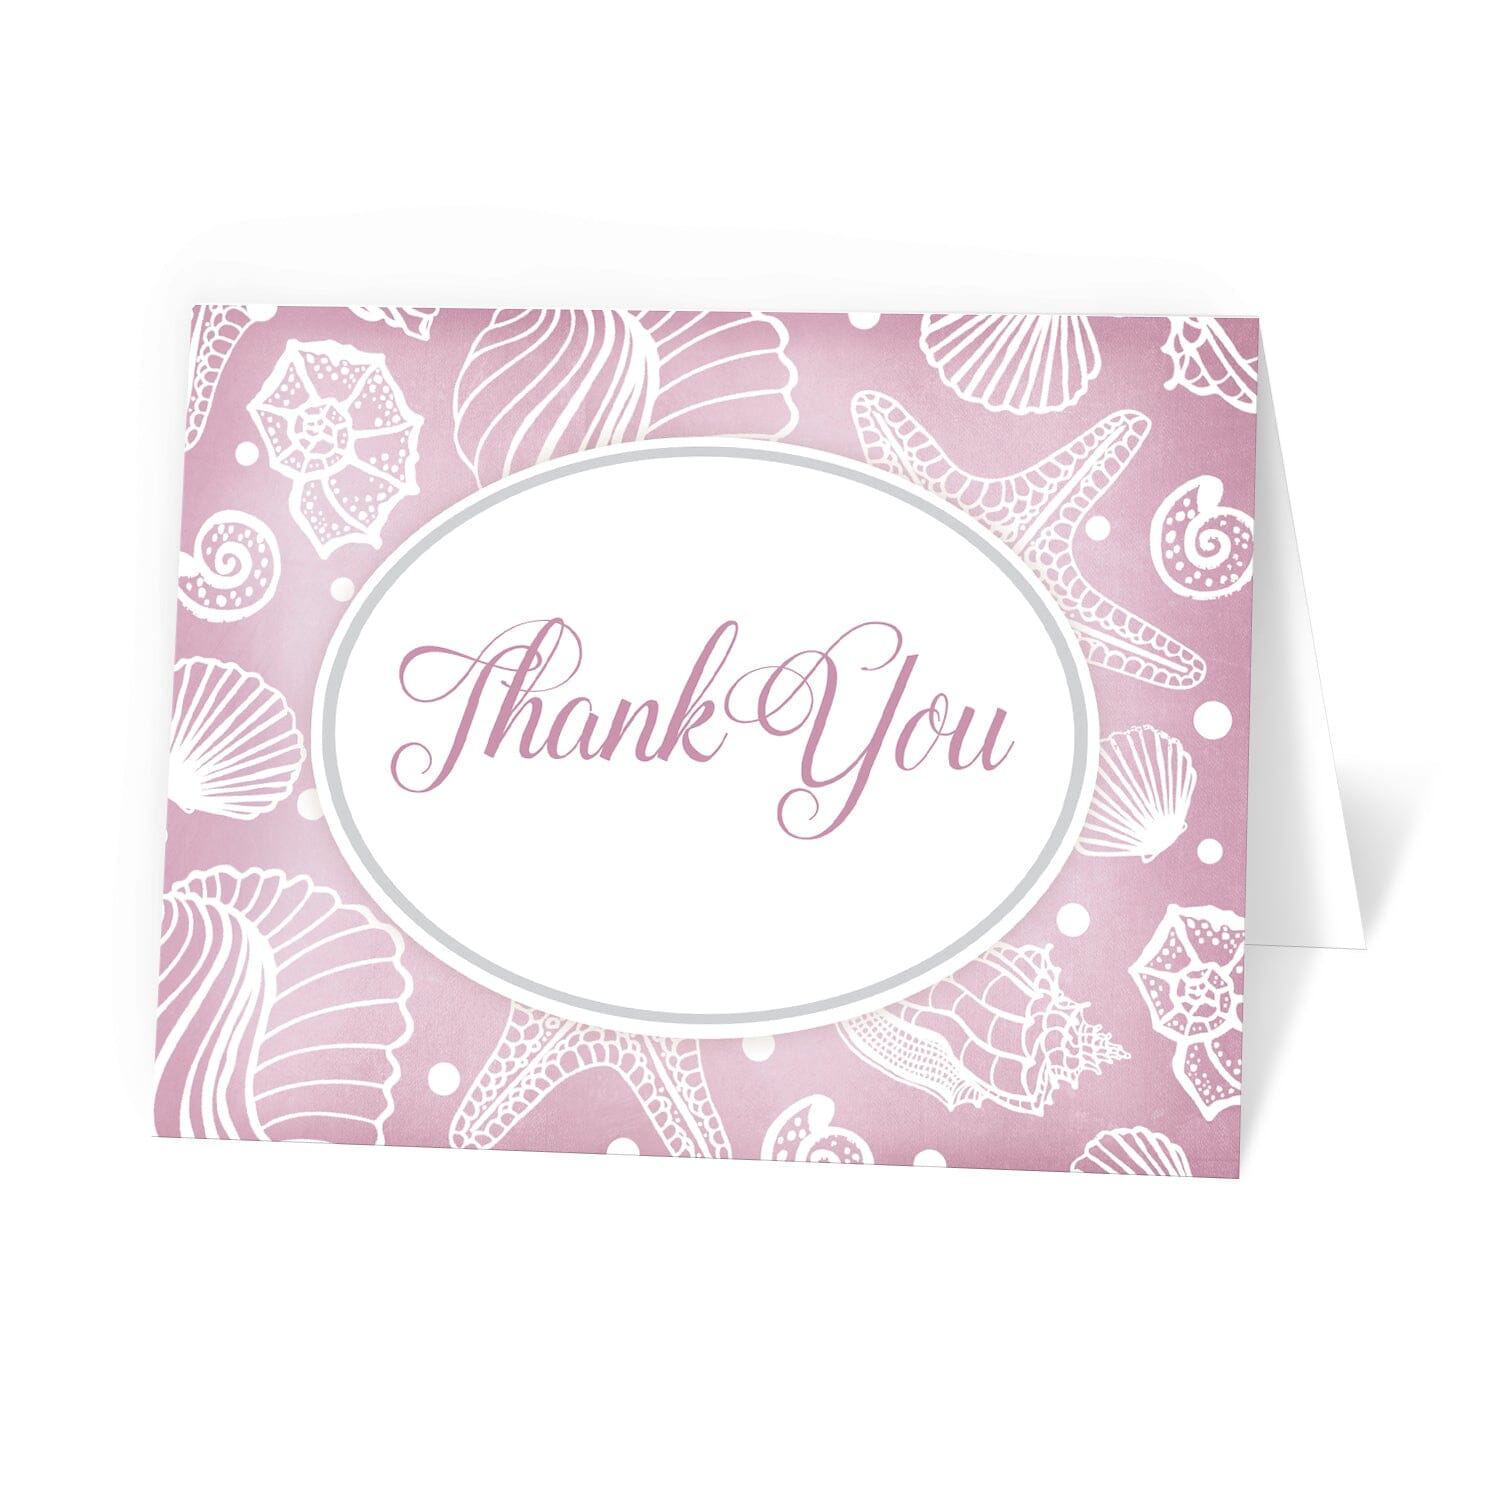 Pretty Pink Seashell Beach Thank You Cards at Artistically Invited.